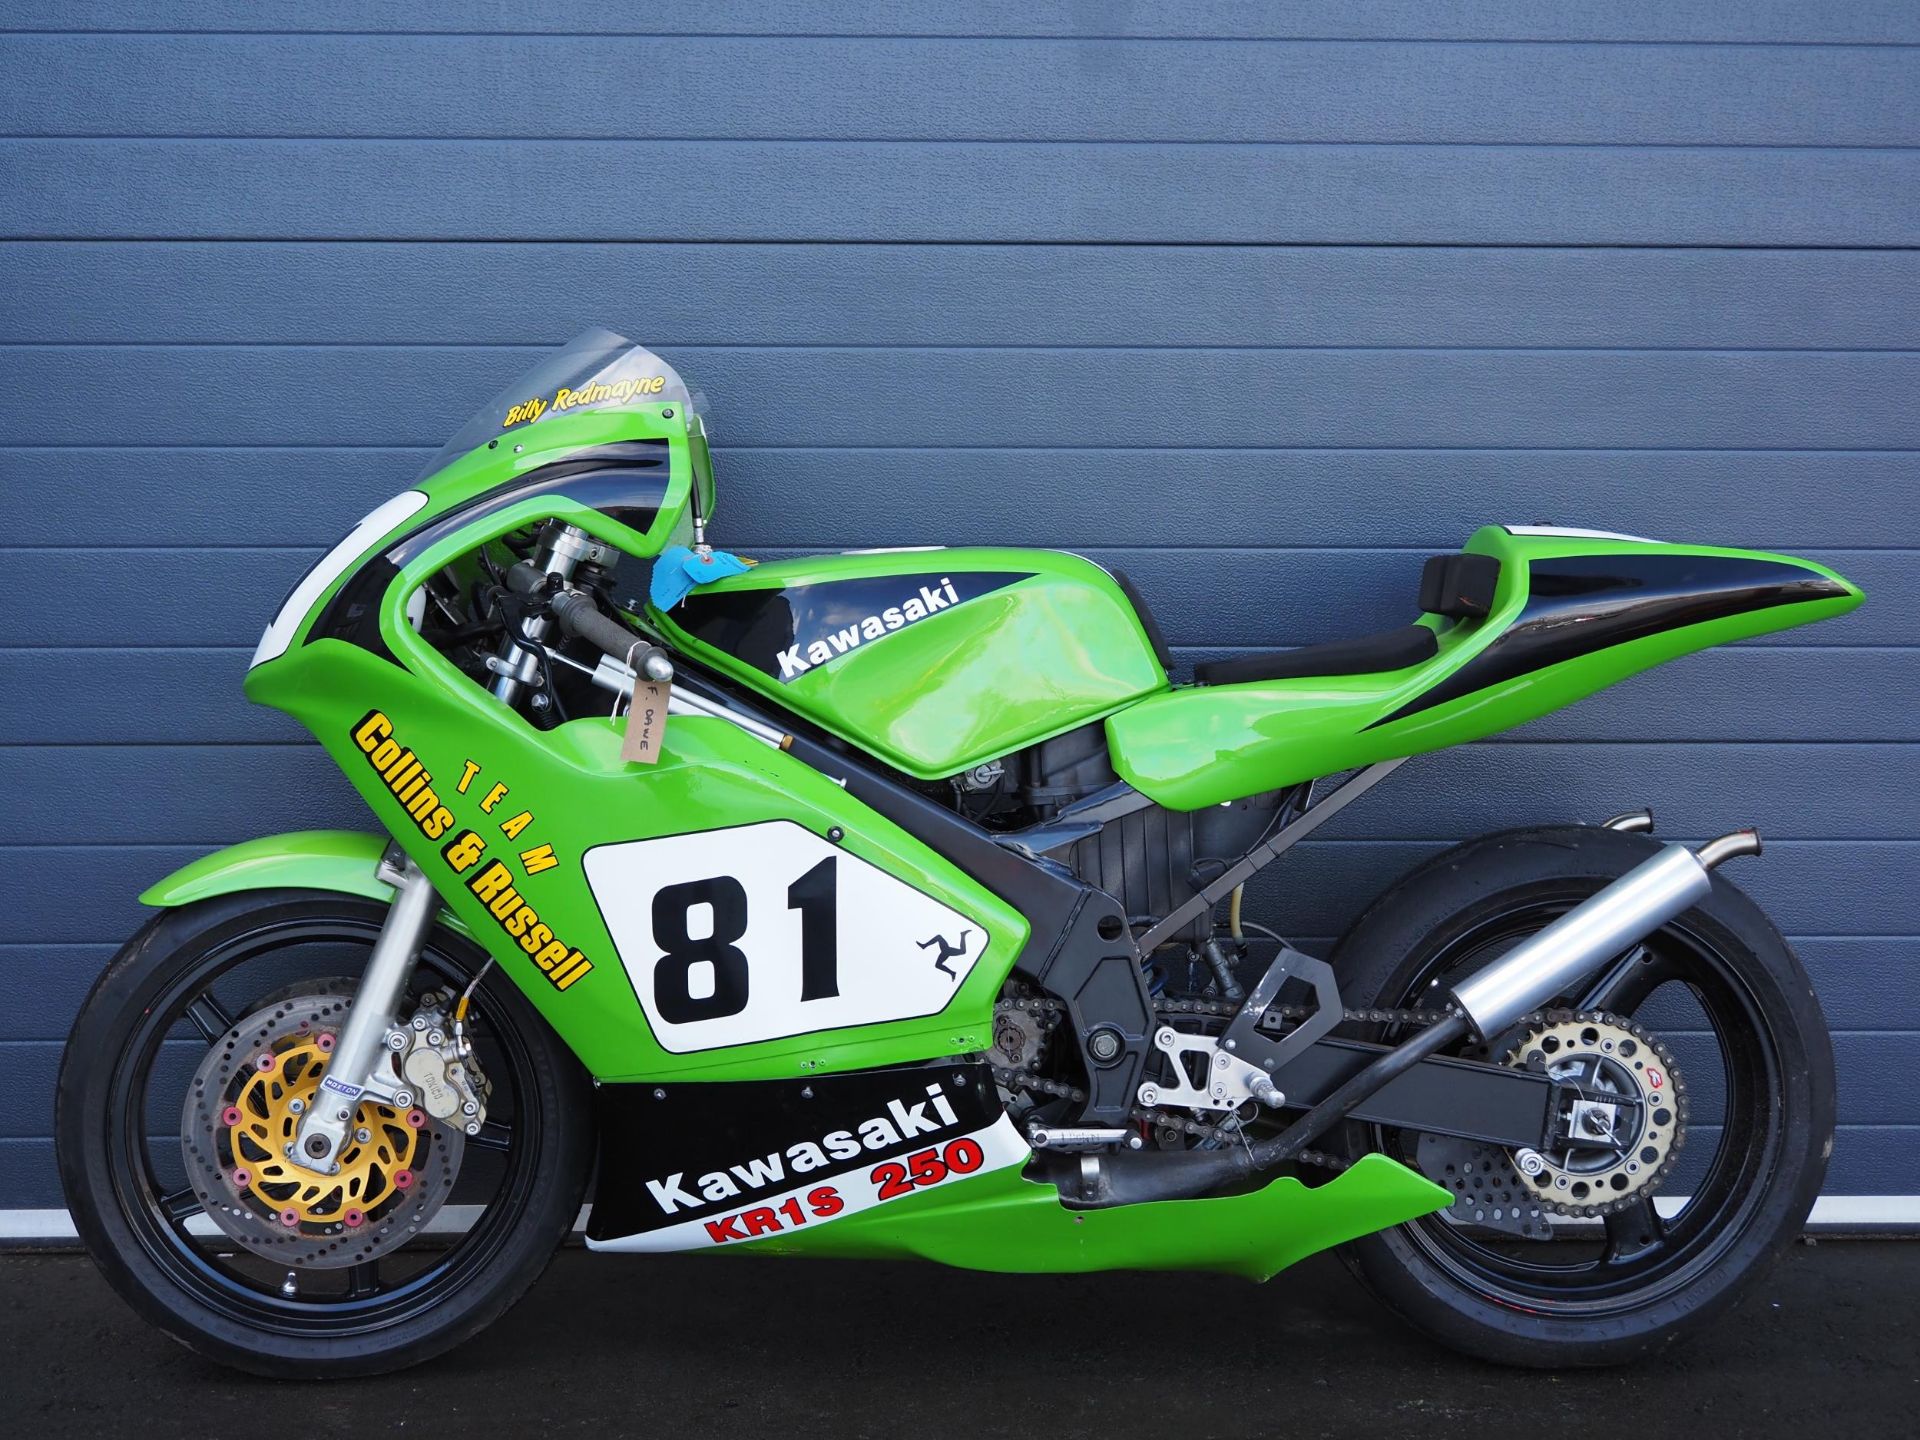 Kawasaki KR1-S 250 F2 motorcycle. 1992 This bike was ridden by Billy Redmayne at the 2015 Classic F2 - Bild 7 aus 8